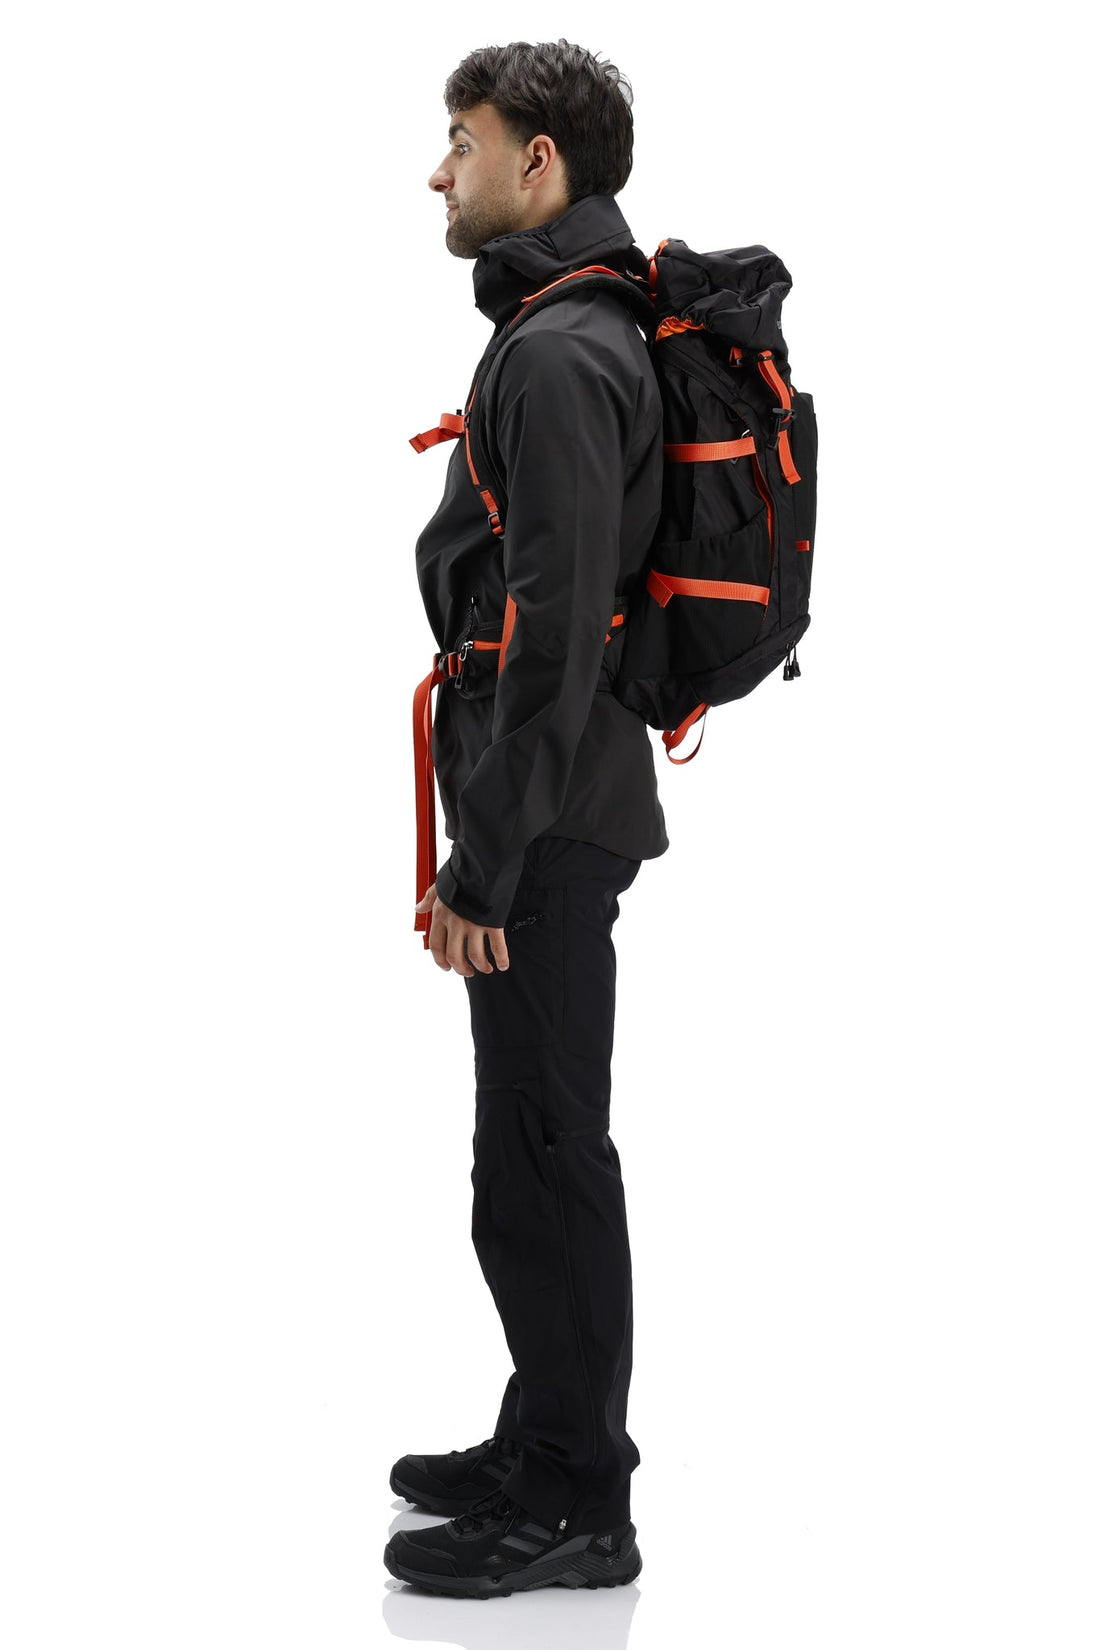 ROCK AVATAR 38 BACKPACK - World of Alps